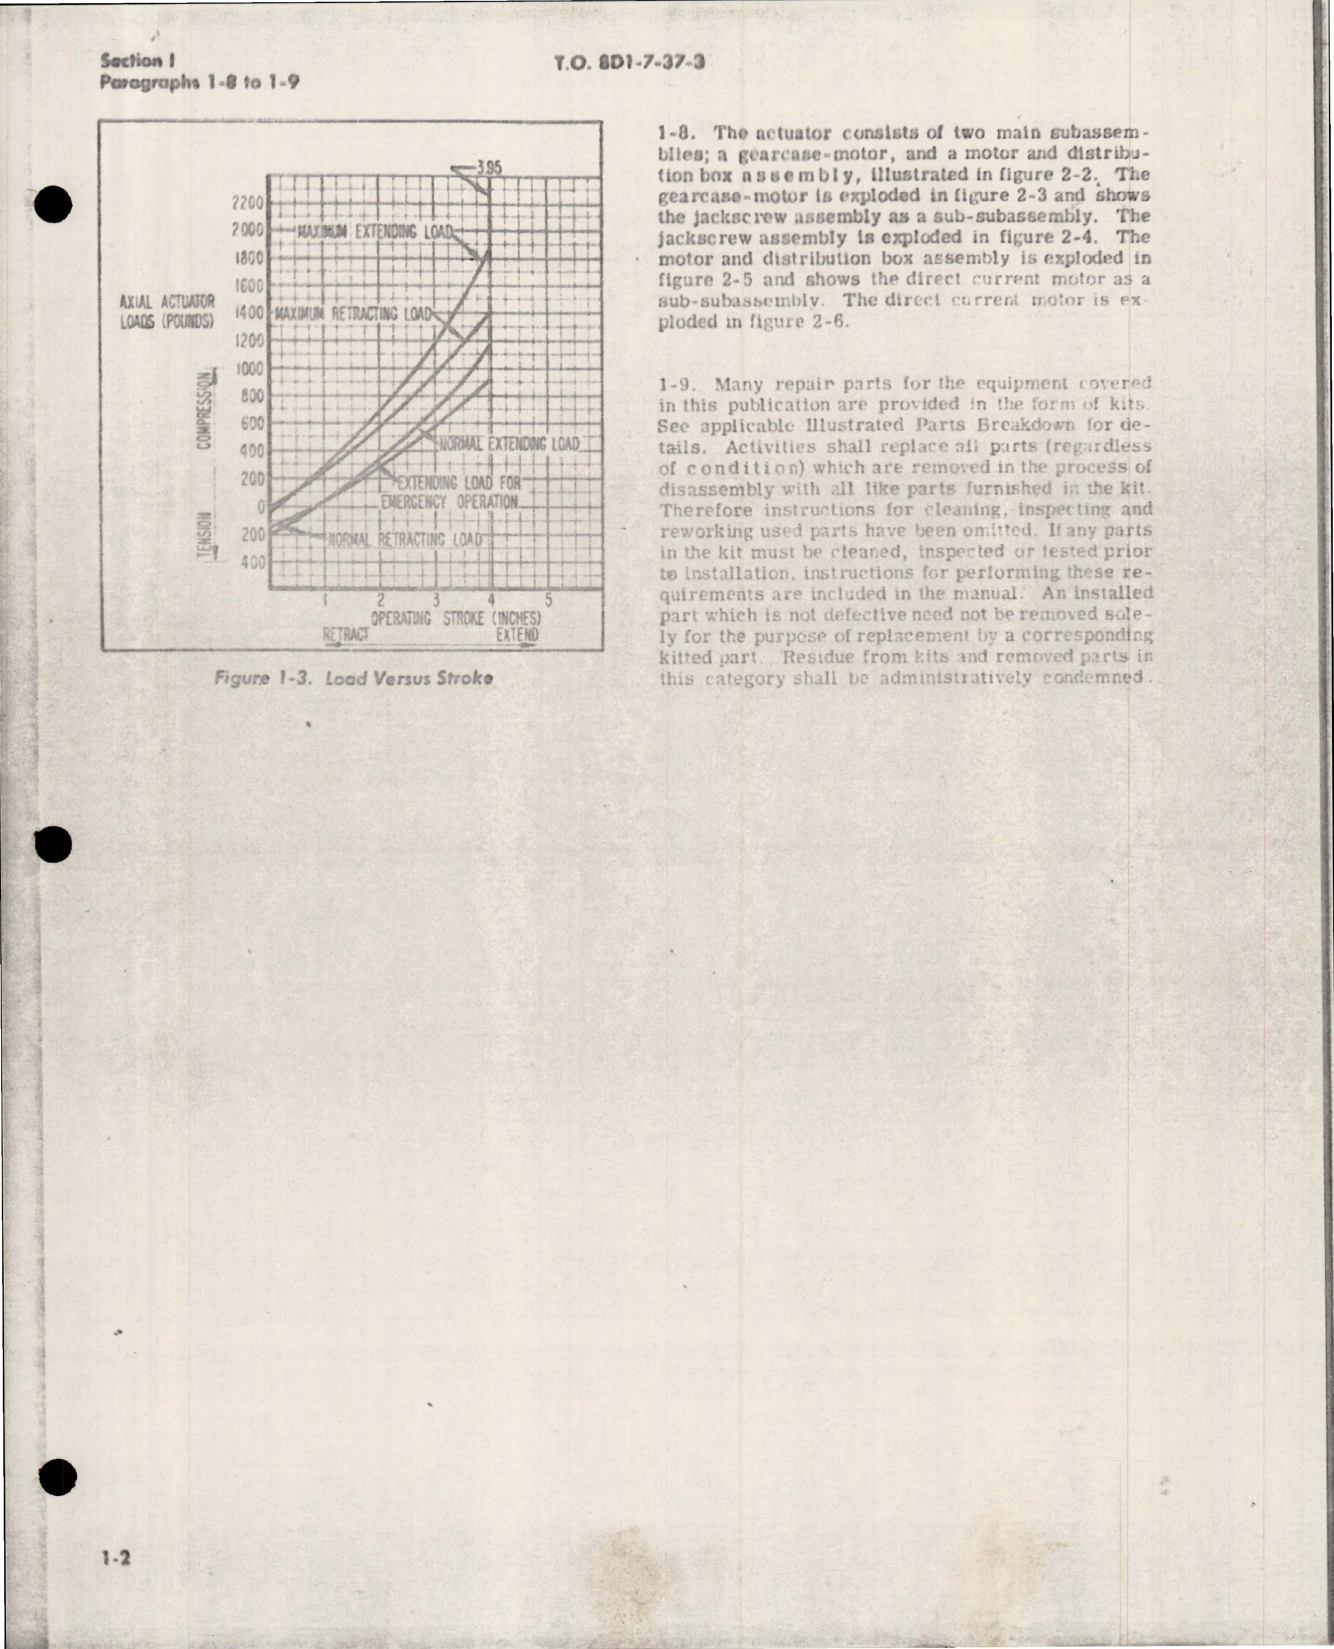 Sample page 5 from AirCorps Library document: Overhaul for Electro-Mechanical Rotary Actuator - Parts 4150-1 and 4150-2 